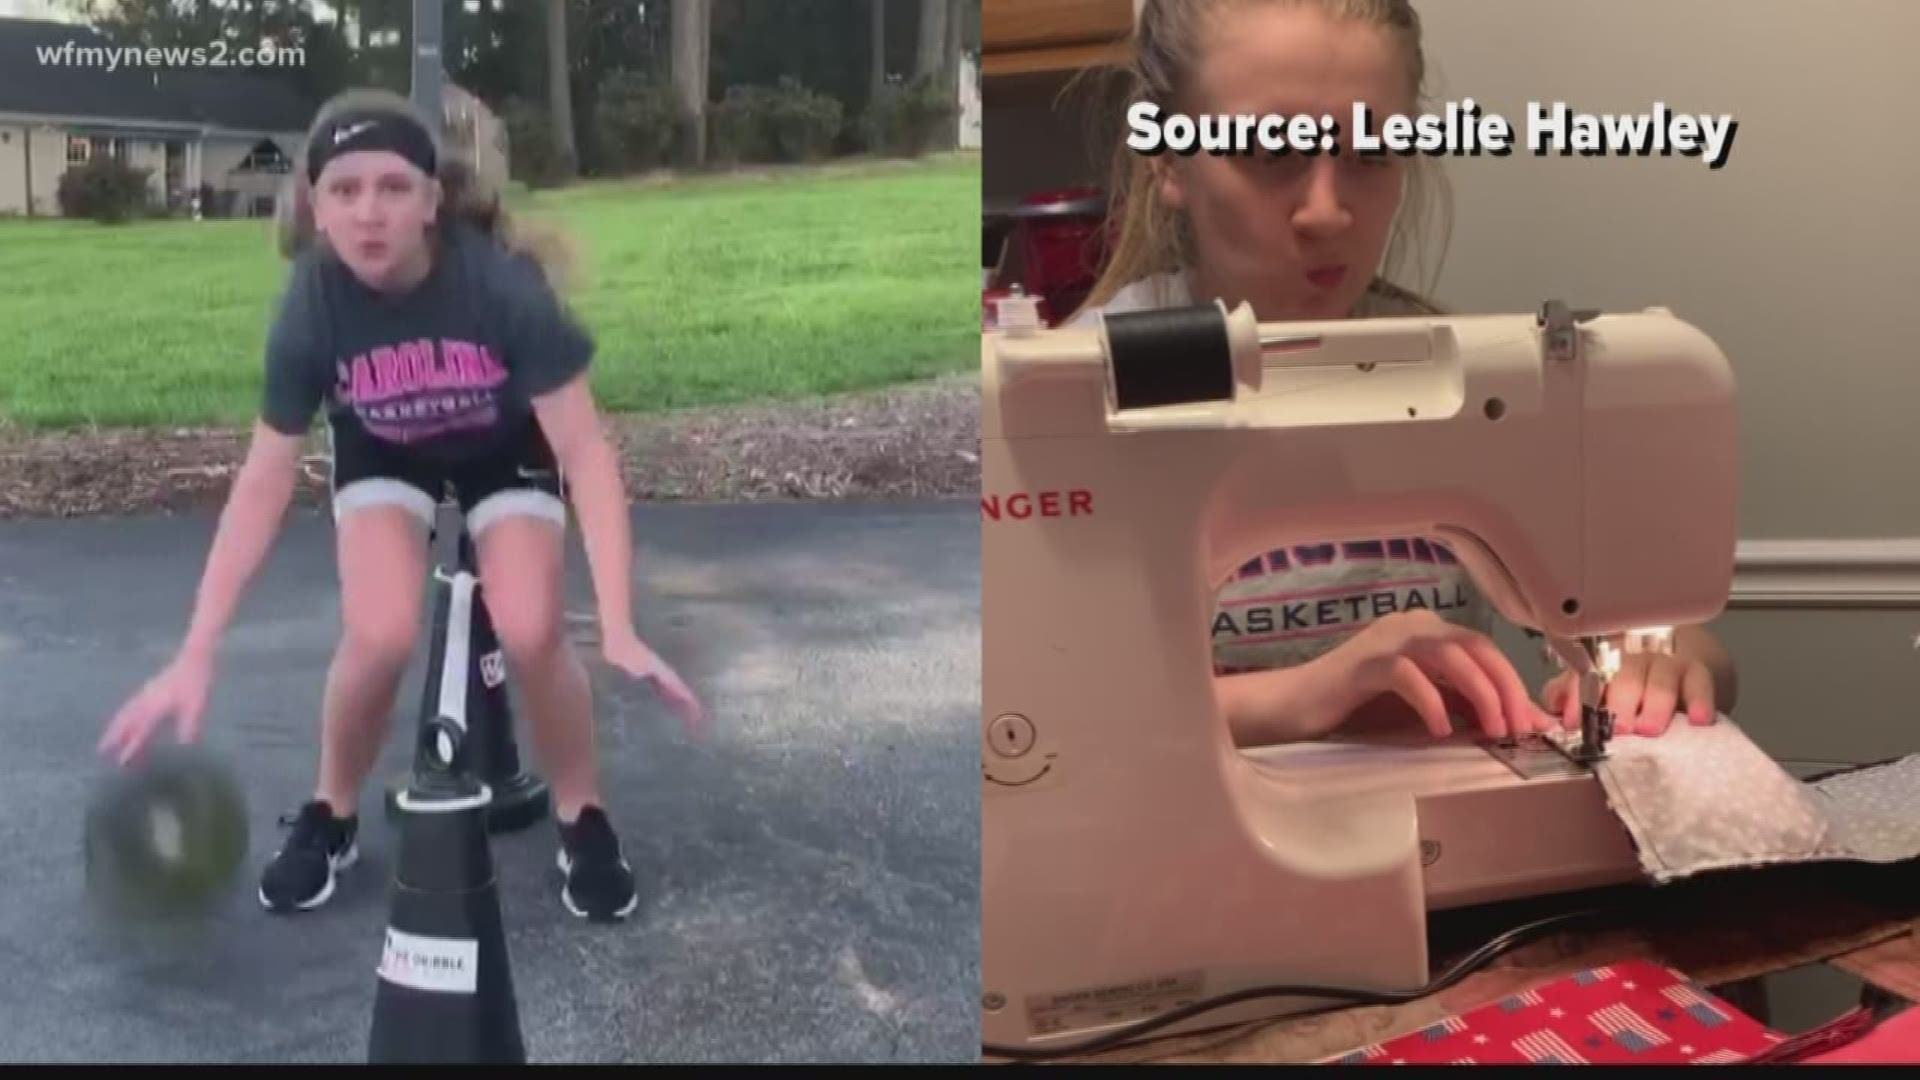 14-year-old Taylor Hawley's traded in her basketball for a sewing machine to help fight coronavirus. She’s helping frontline workers from nursing homes to hospitals.